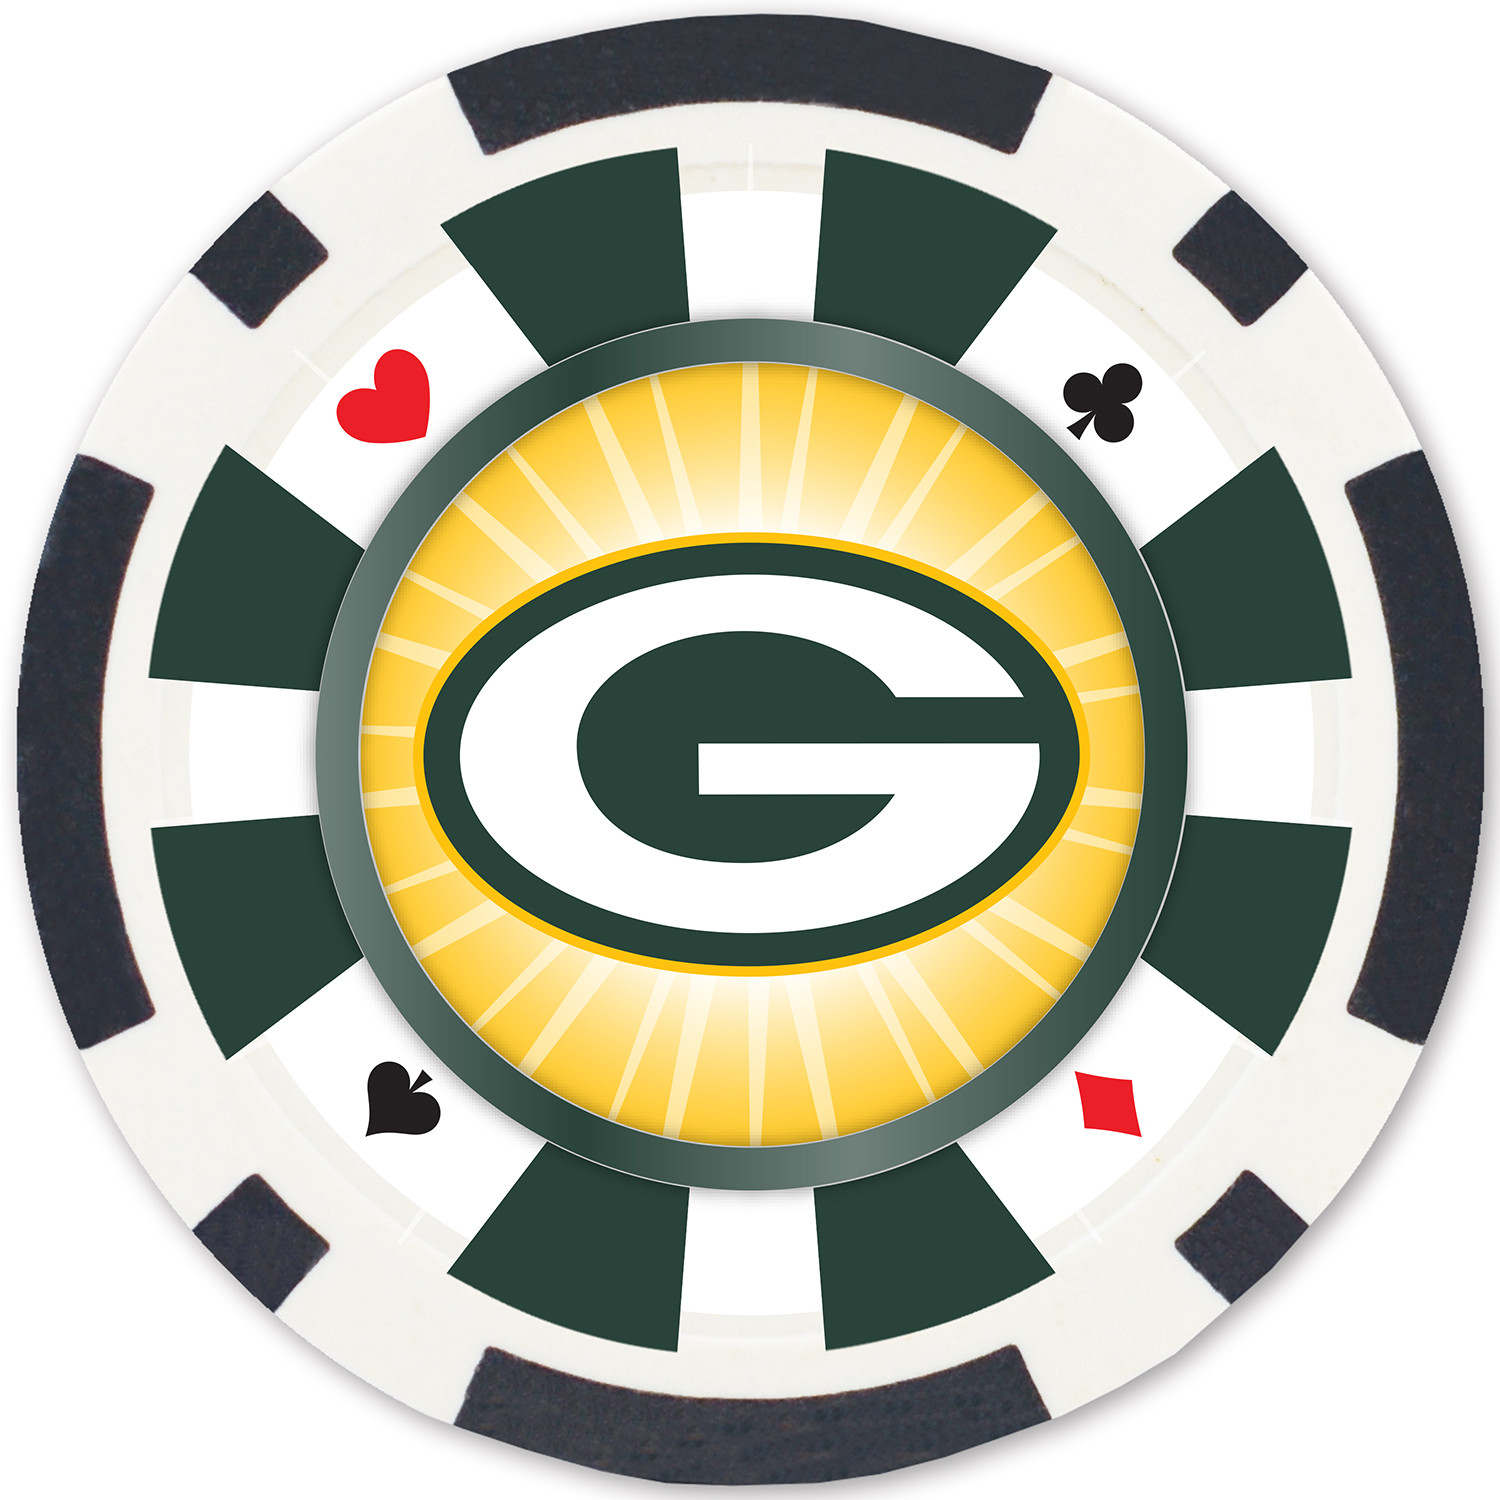 MasterPieces Casino Style 100 Piece Poker Chip Set - NFL Green Bay Packers - image 3 of 6